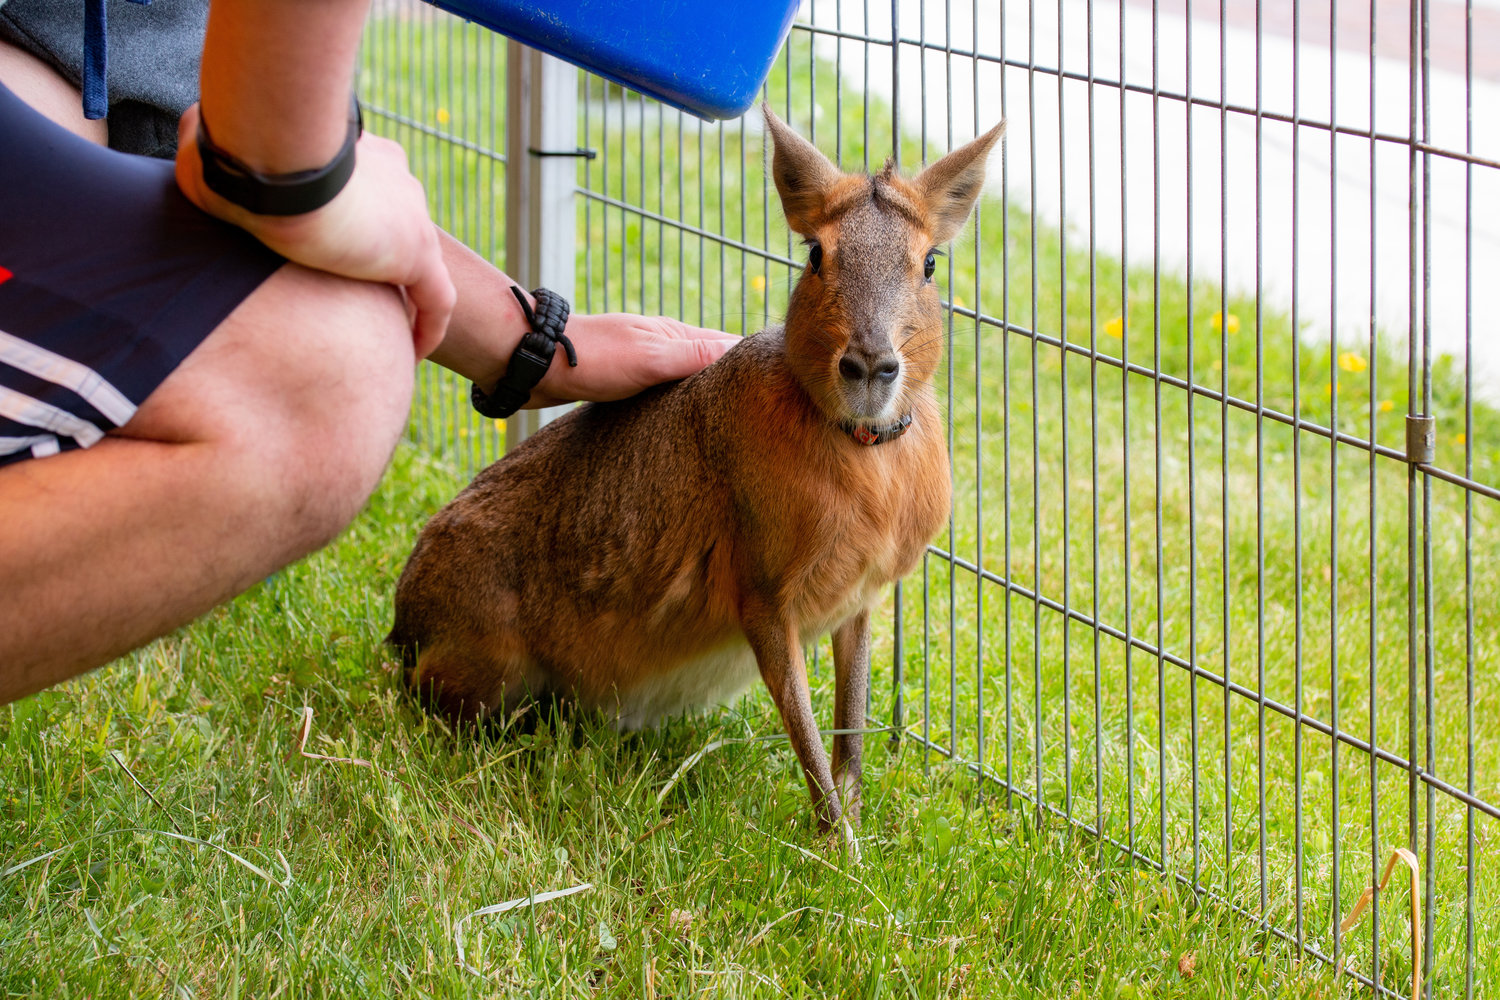 This patagonian mara, named Clementine, was at the petting zoo at the Centralia College SpringFest Tuesday afternoon.